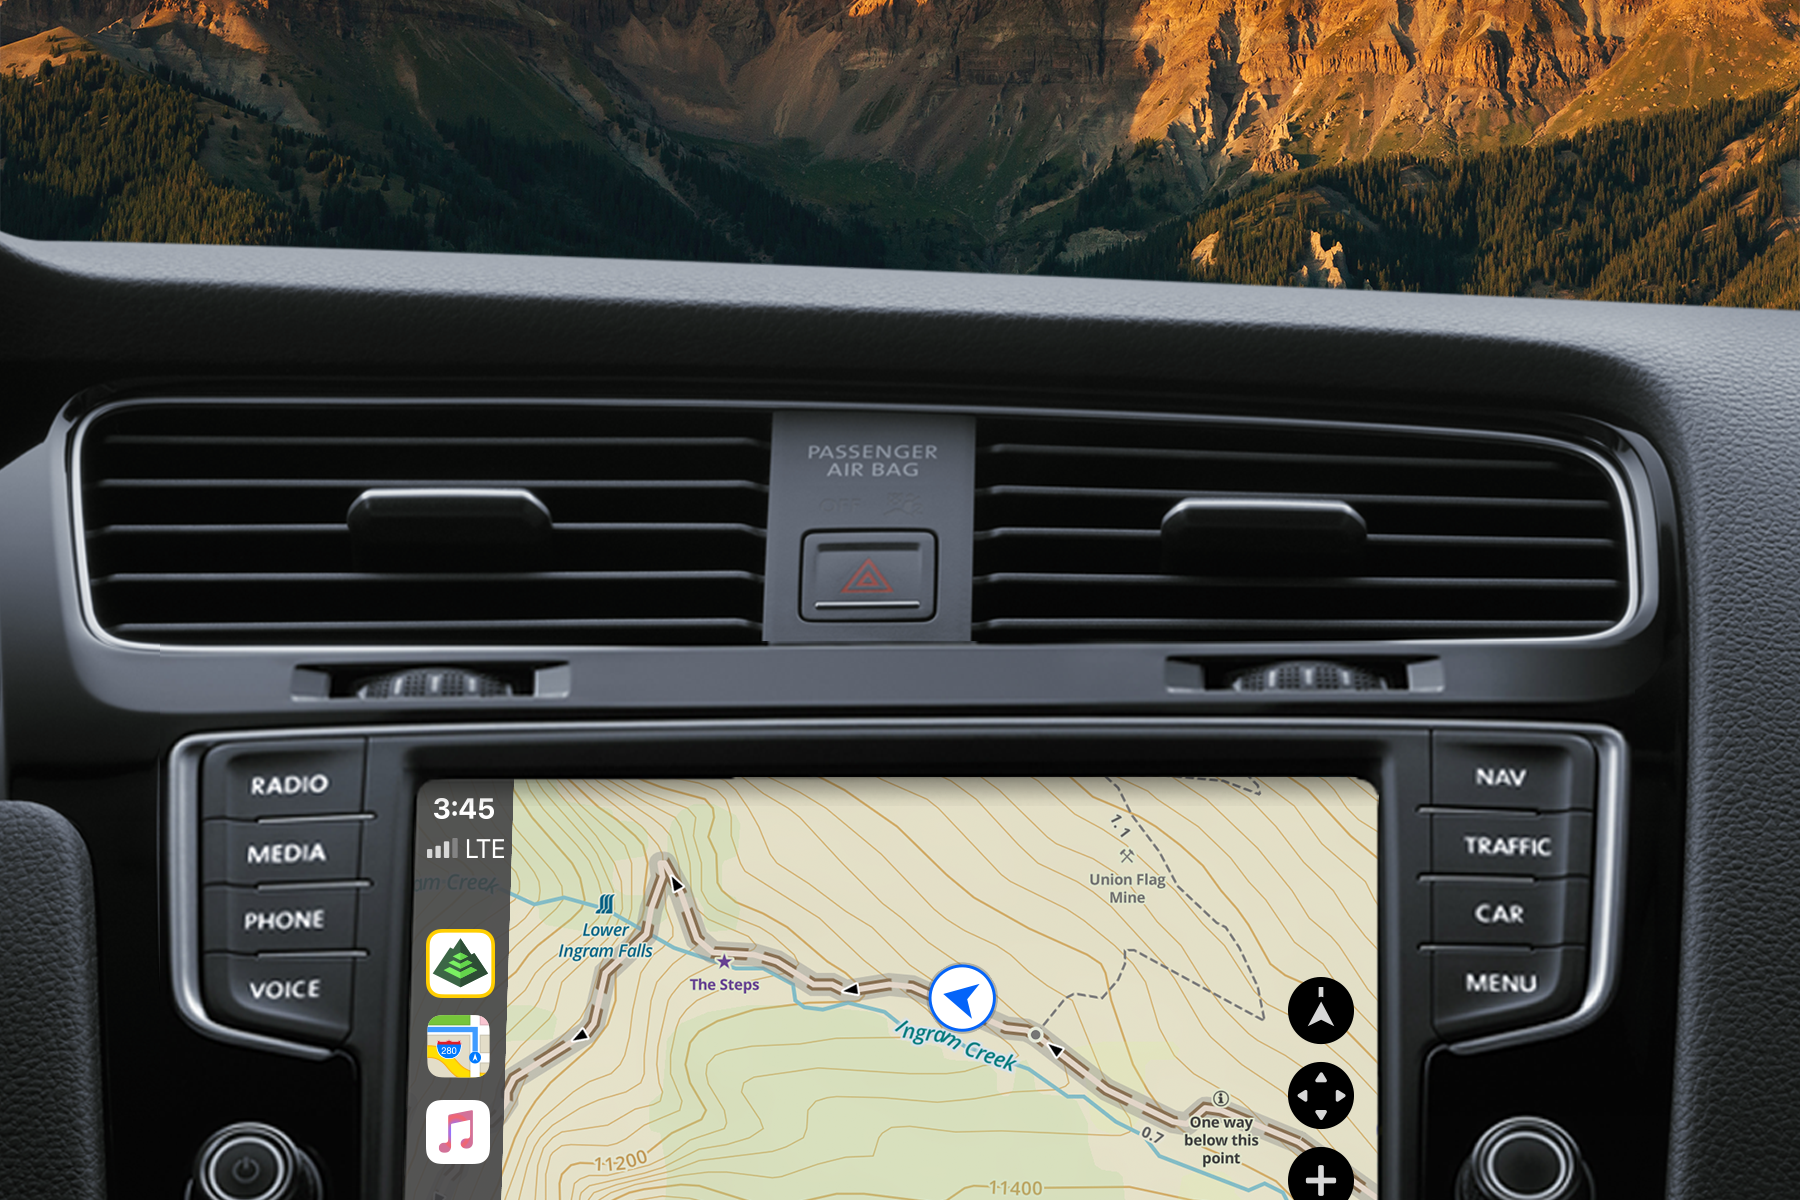 Gaia Overland map on the dash.